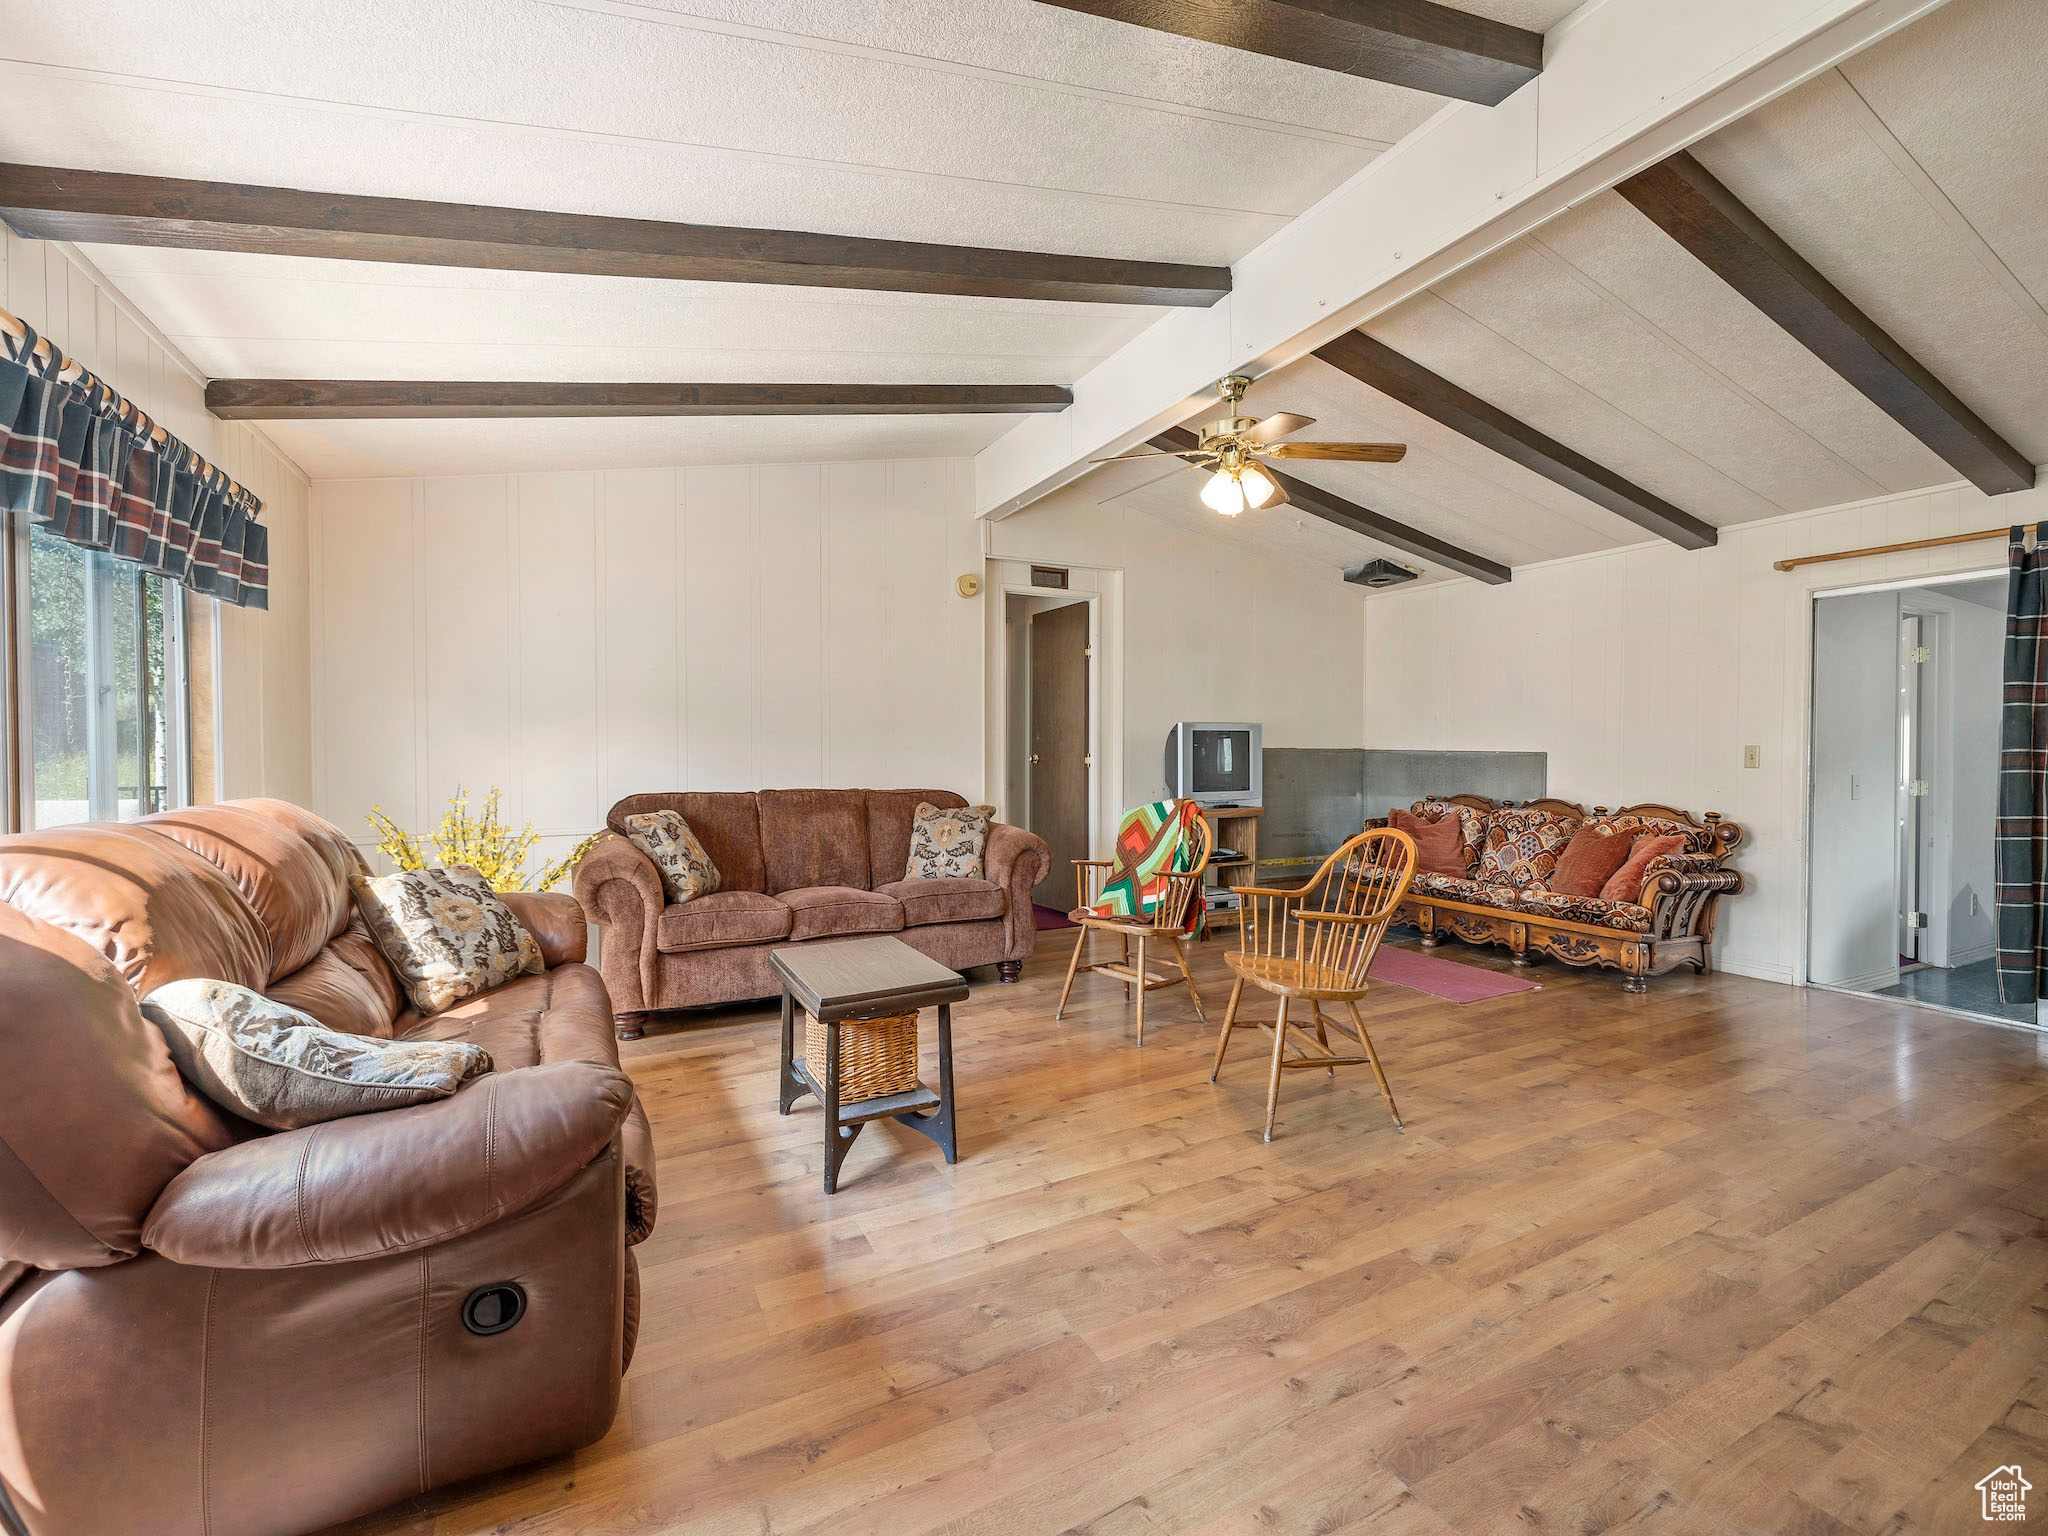 Living room featuring light wood-type flooring, ceiling fan, and vaulted ceiling with beams